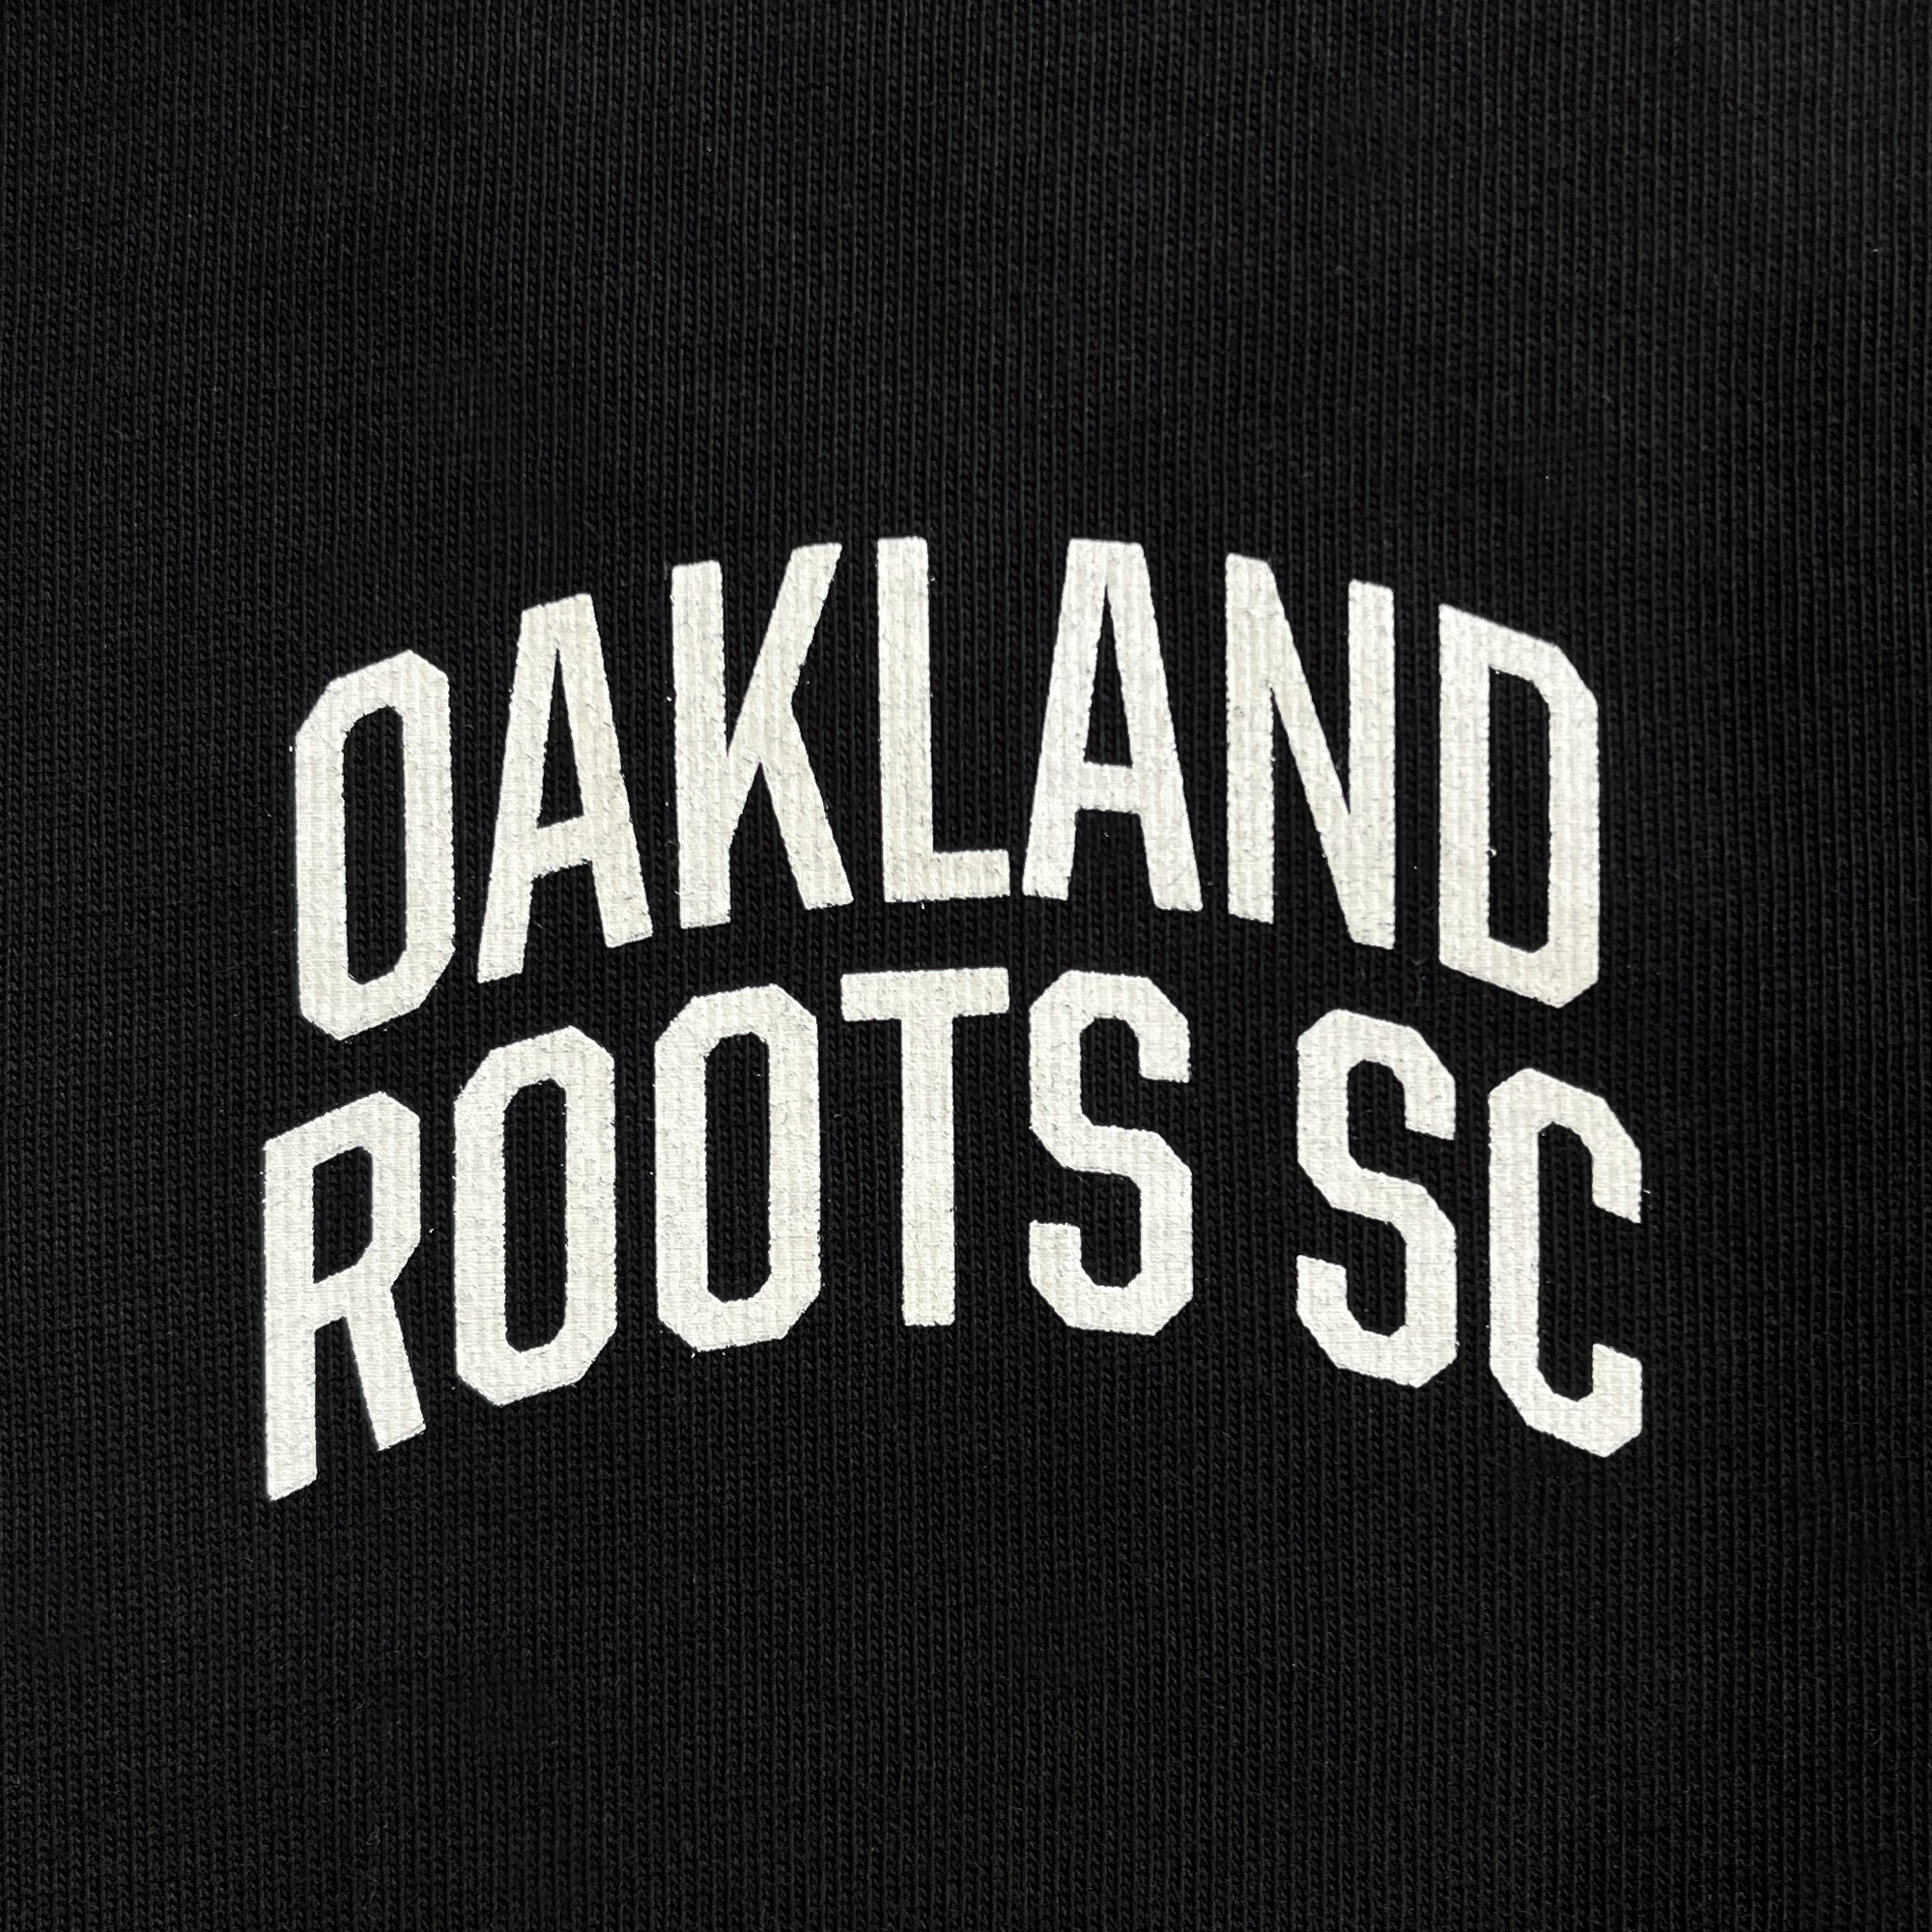 Detailed close-up of white OAKLAND ROOTS SC wordmark on a black baseball jersey.